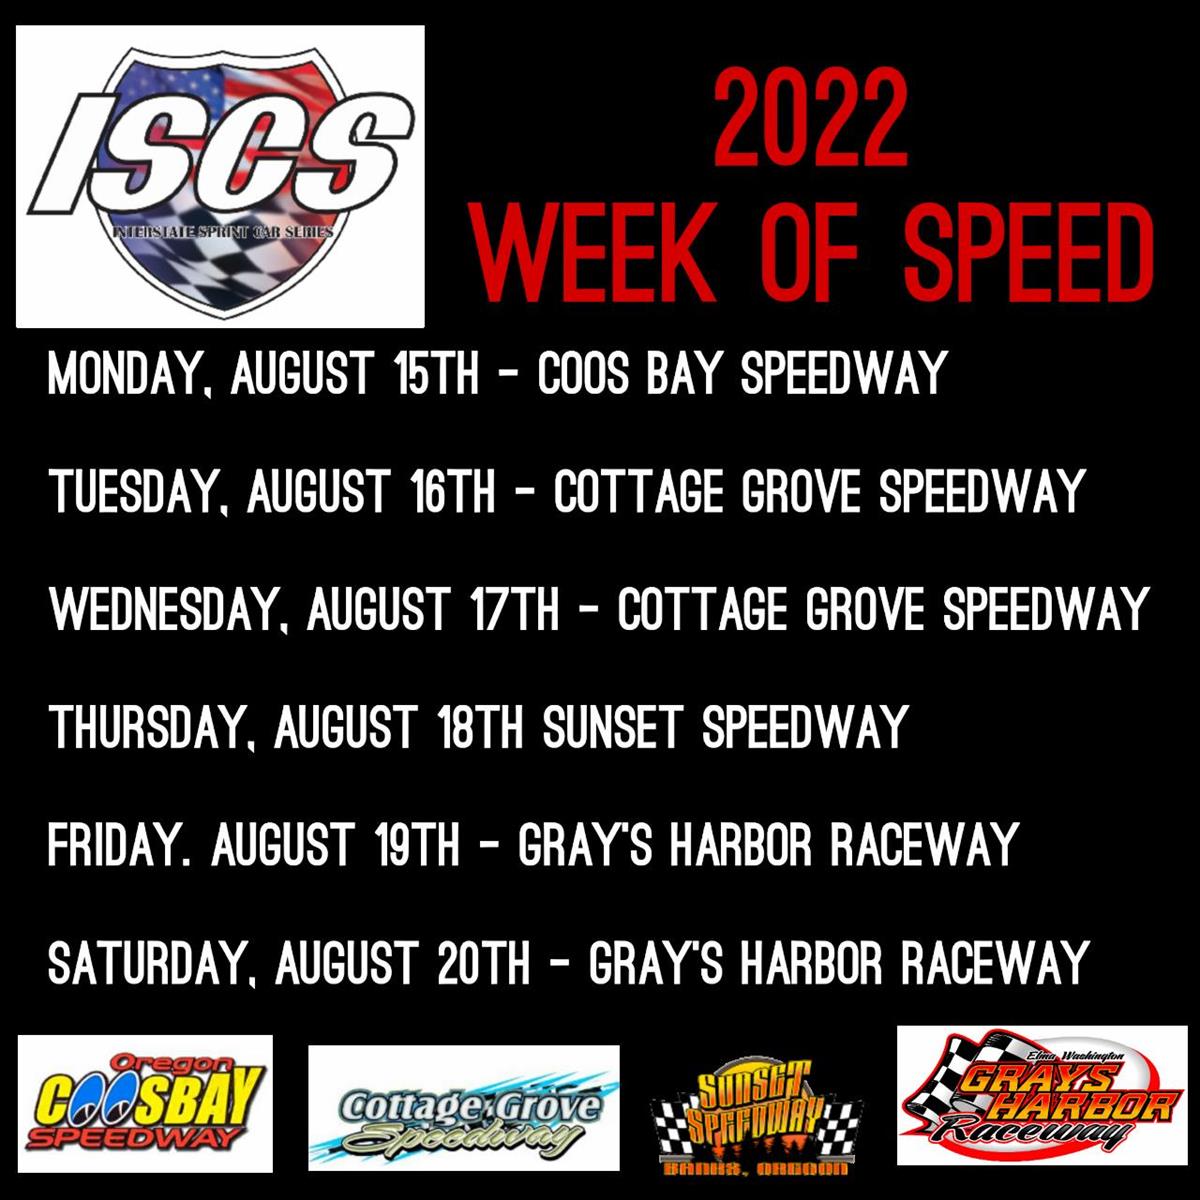 ANNUAL WEEK OF SPEED BACK AT CG TUESDAY &amp; WEDNESDAY, AUG 16TH &amp; 17TH!!